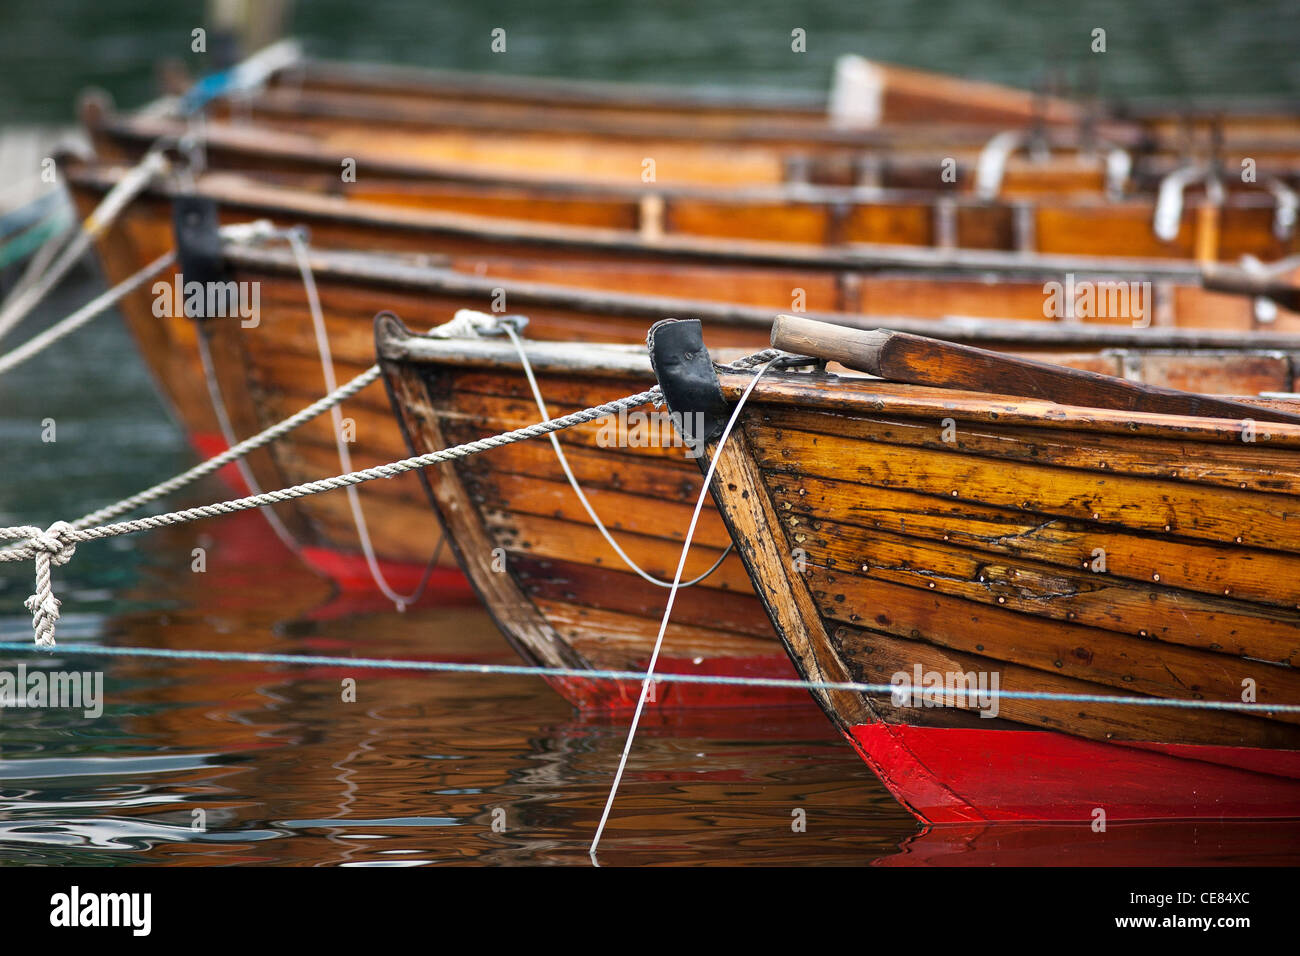 The bows of several rowing boats lined up on the dock in Bowness-on-Windermere Stock Photo